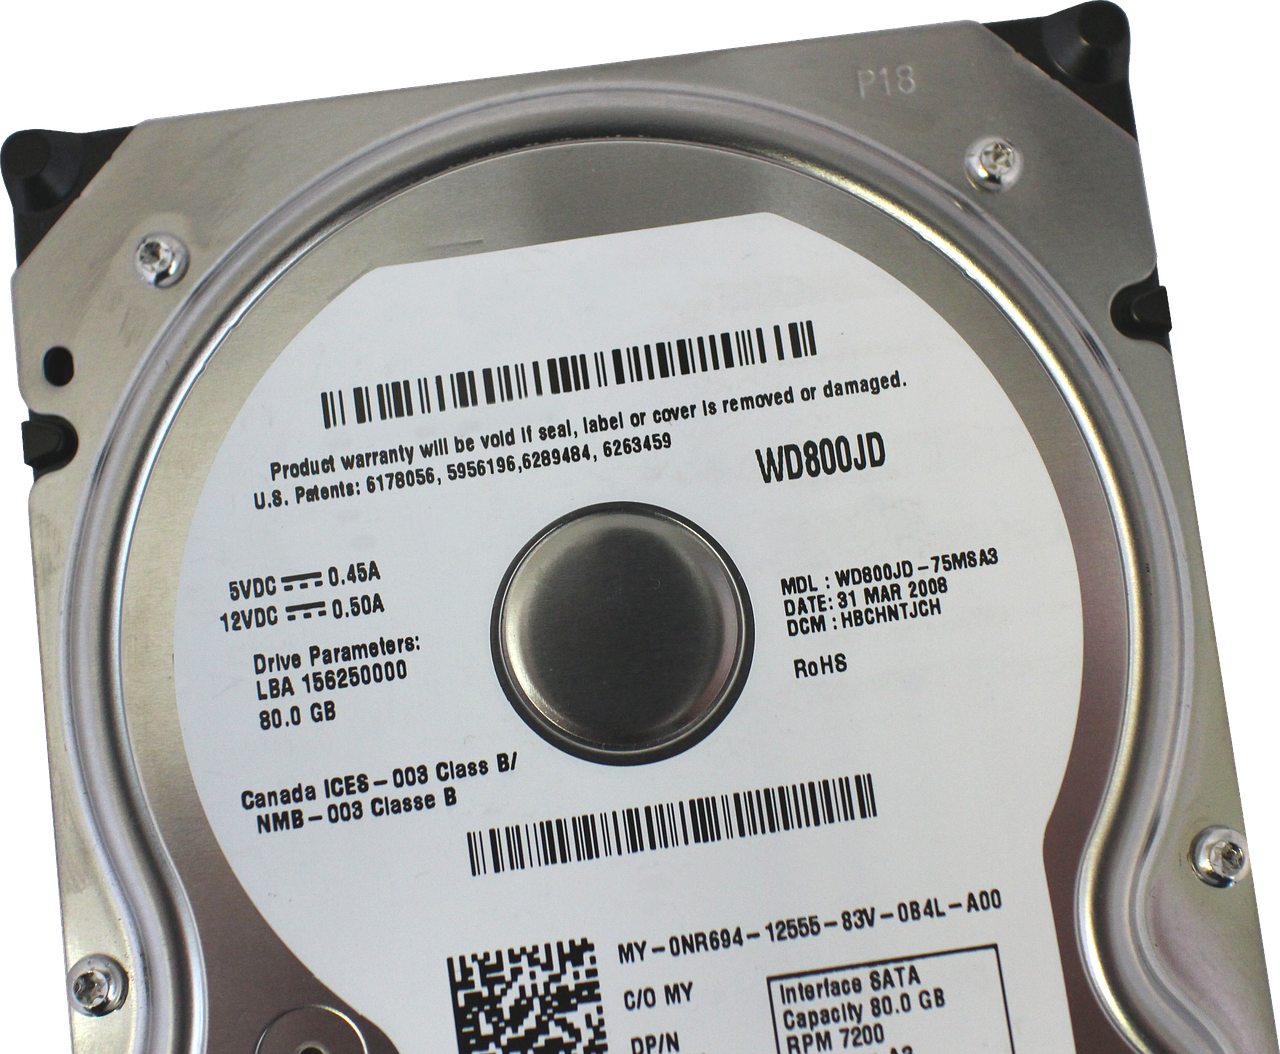 hdd the harddrive storage free photo